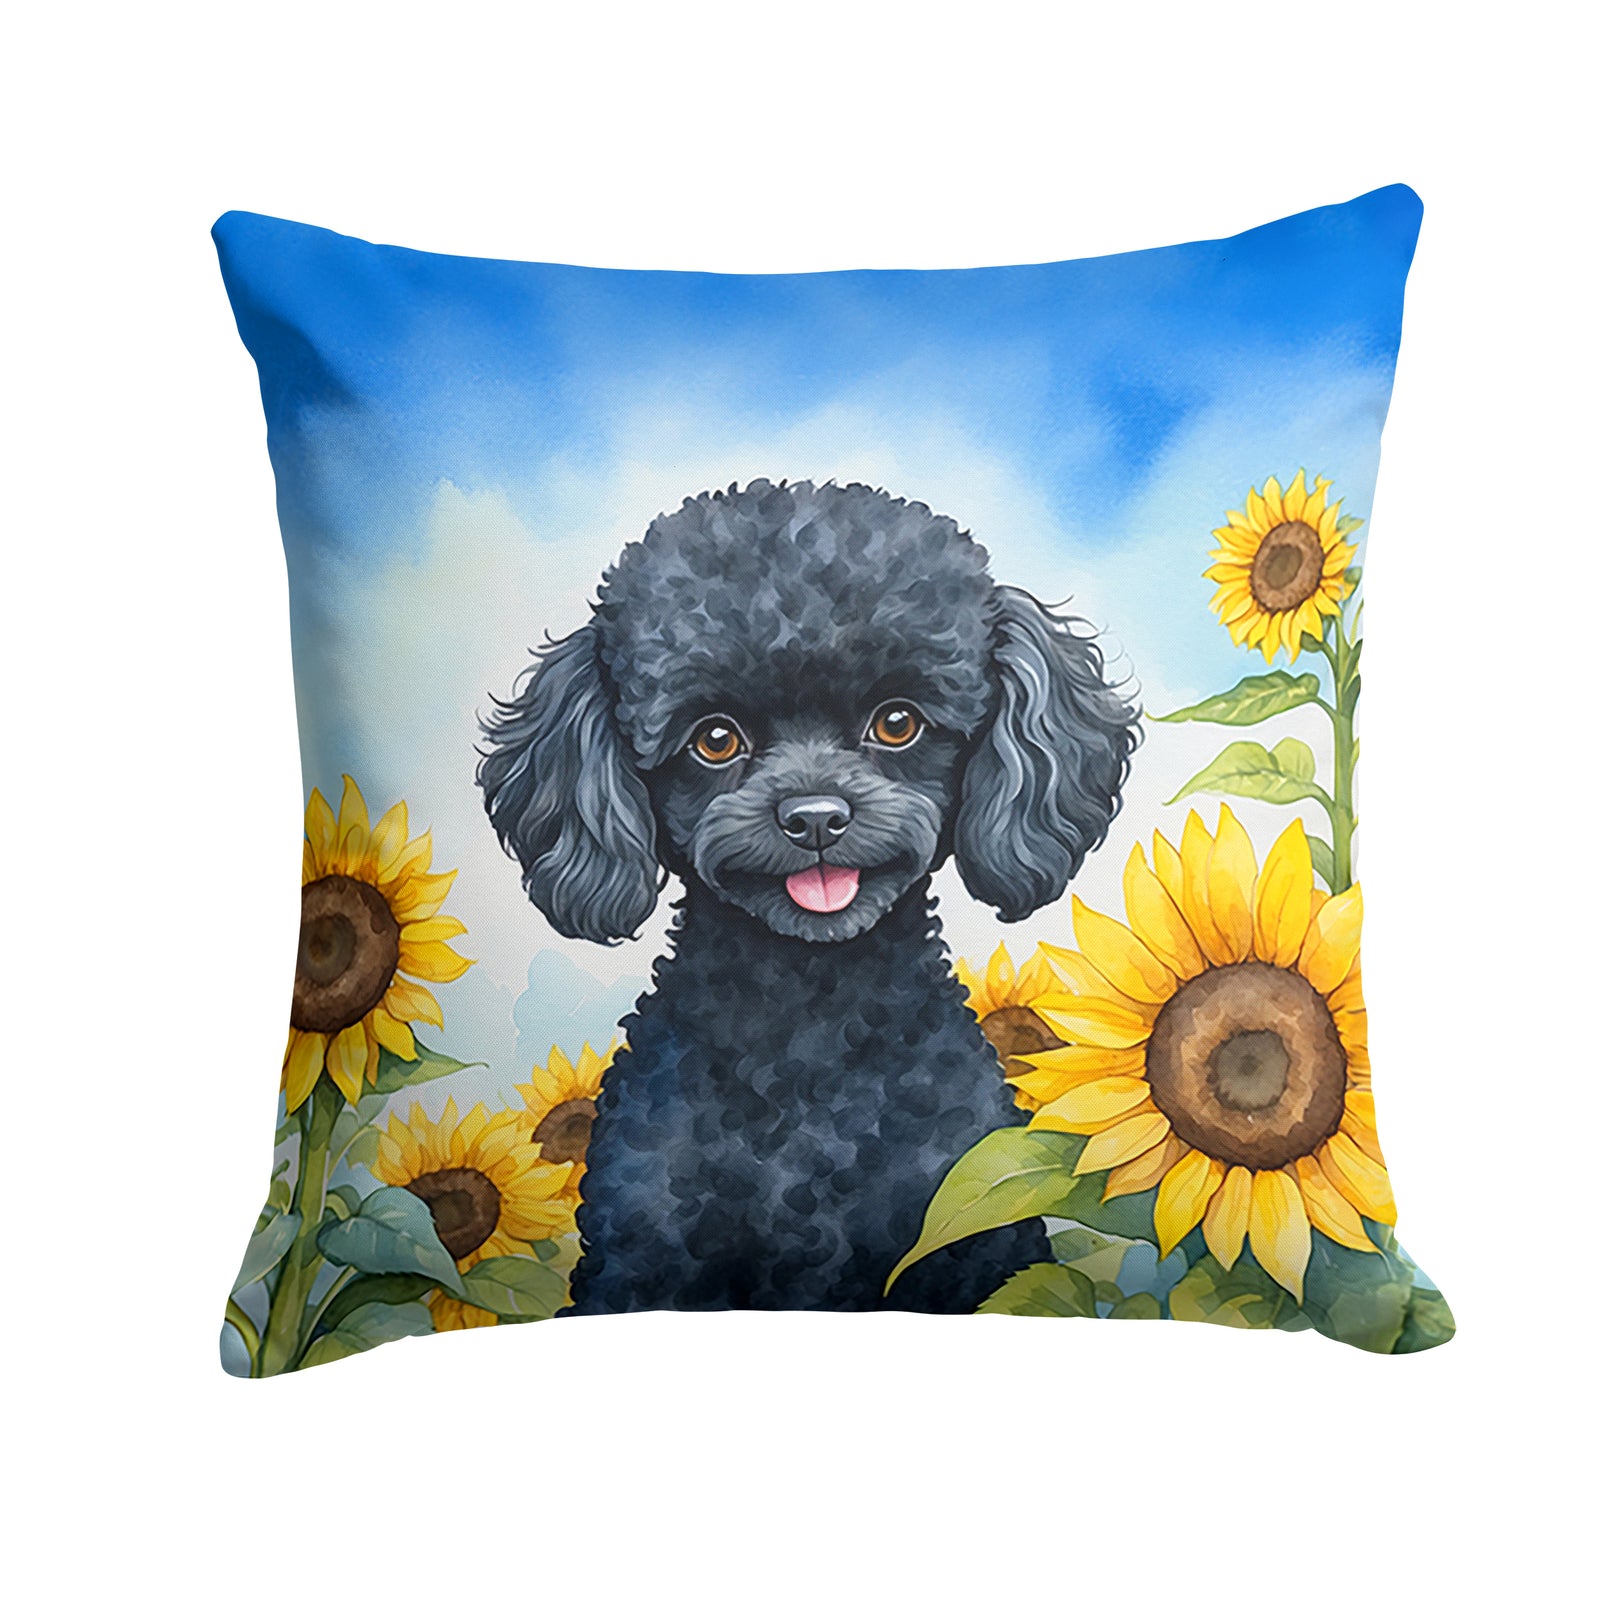 Buy this Black Poodle in Sunflowers Throw Pillow